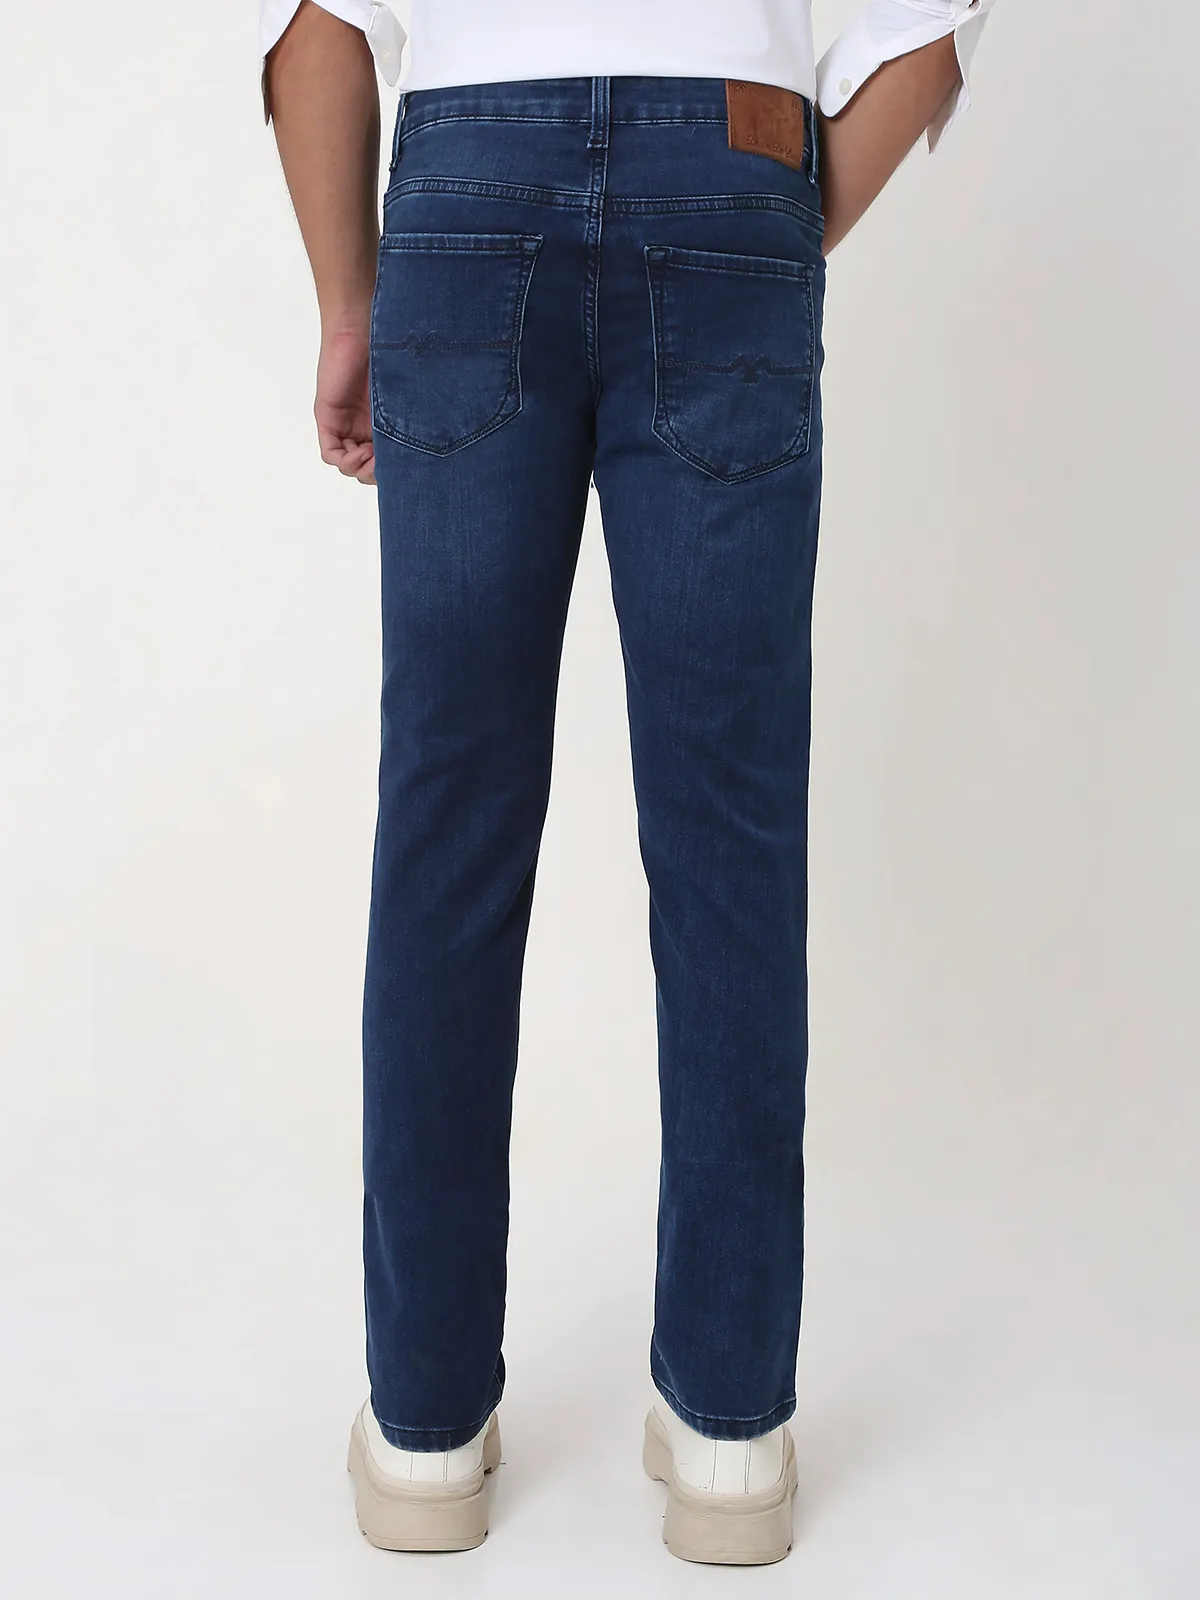 MUFTI navy washed slim fit jeans